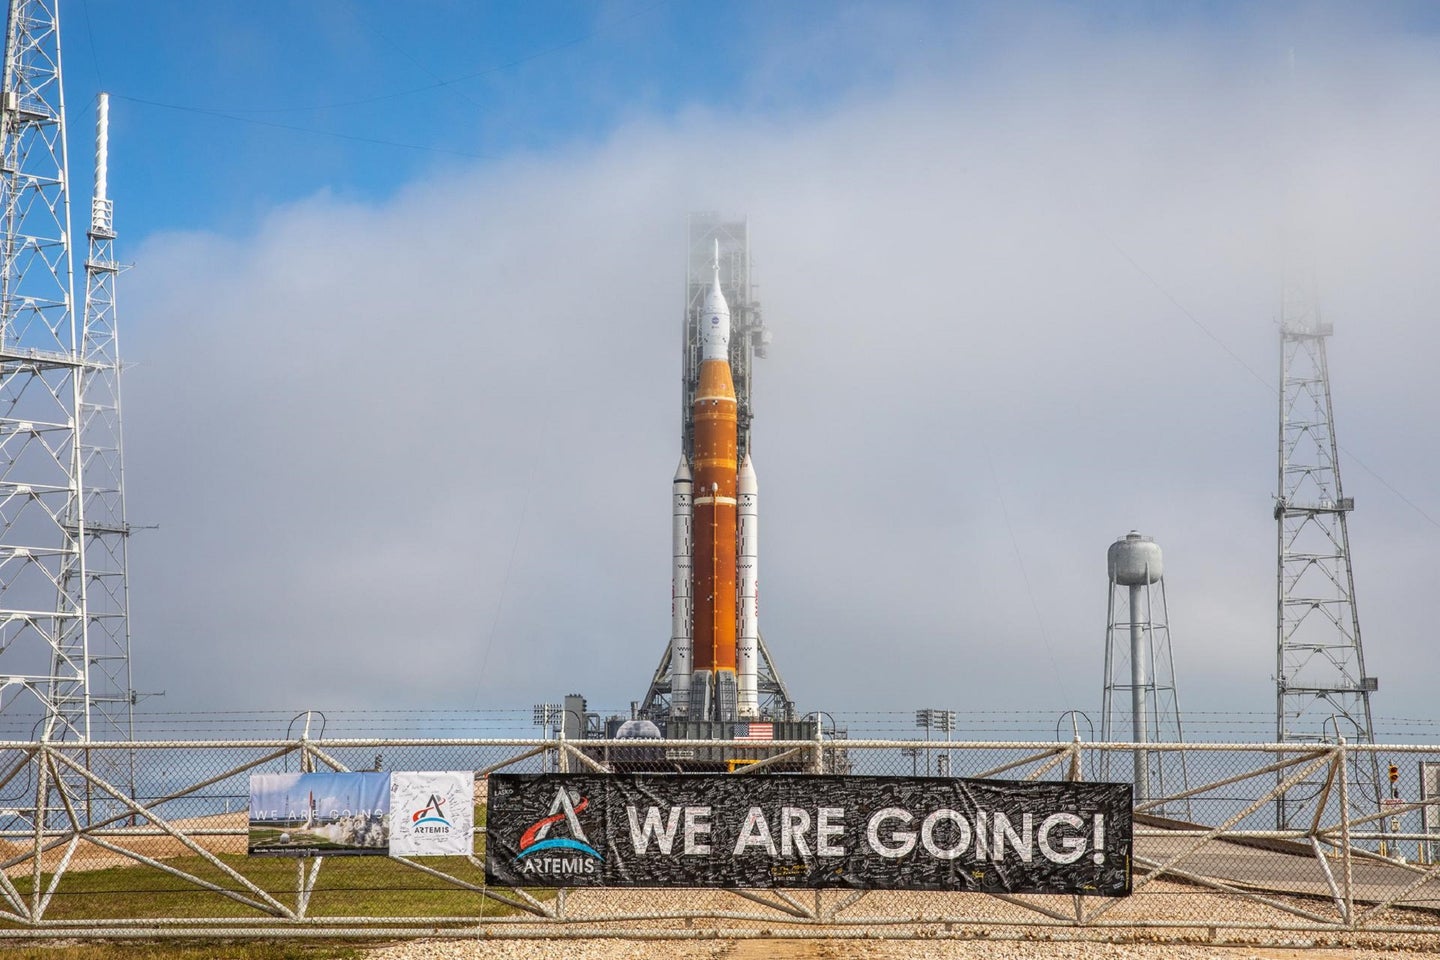 Orange NASA SLS rocket at launchpad at Kennedy Space Center in Florida with a brown banner that says "we are going"